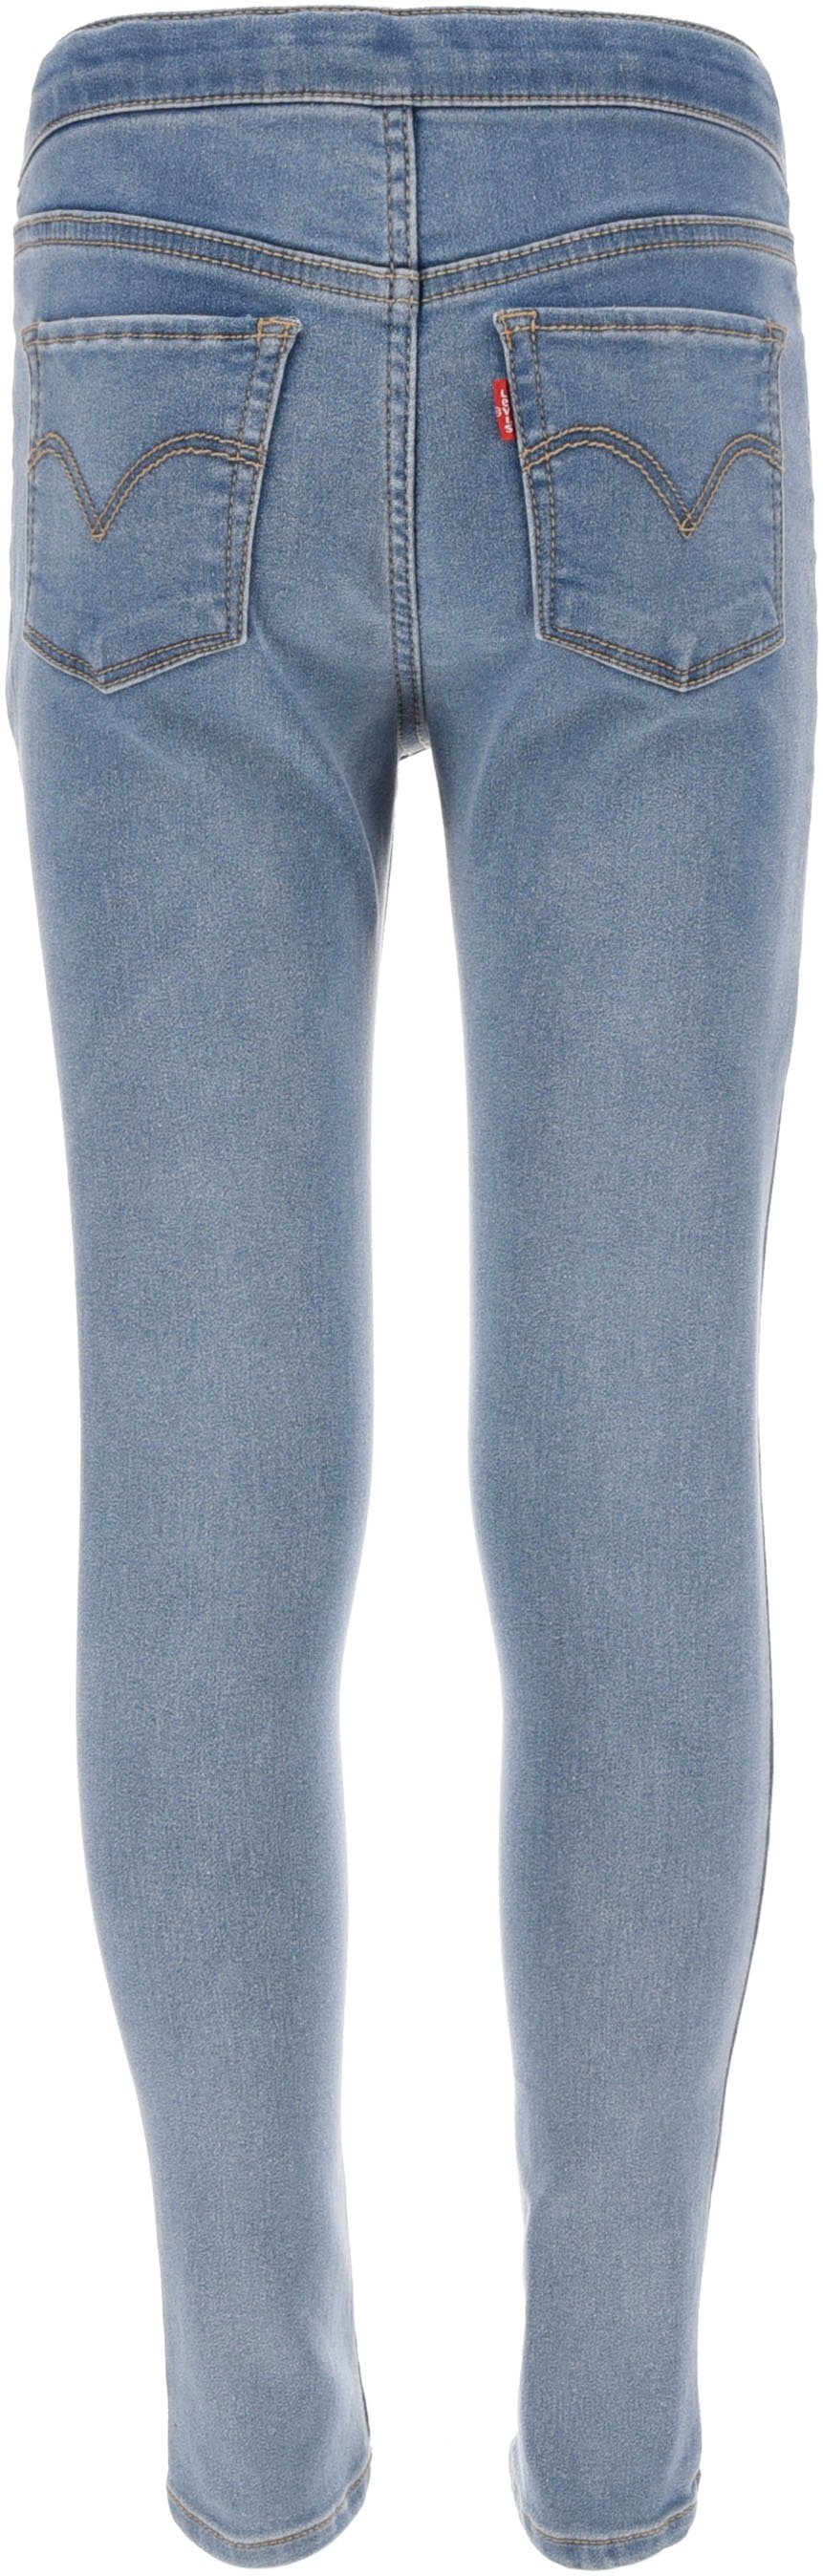 Levi's® Kids Jeansjeggings PULL-ON for GIRLS miami vices LEGGINGS